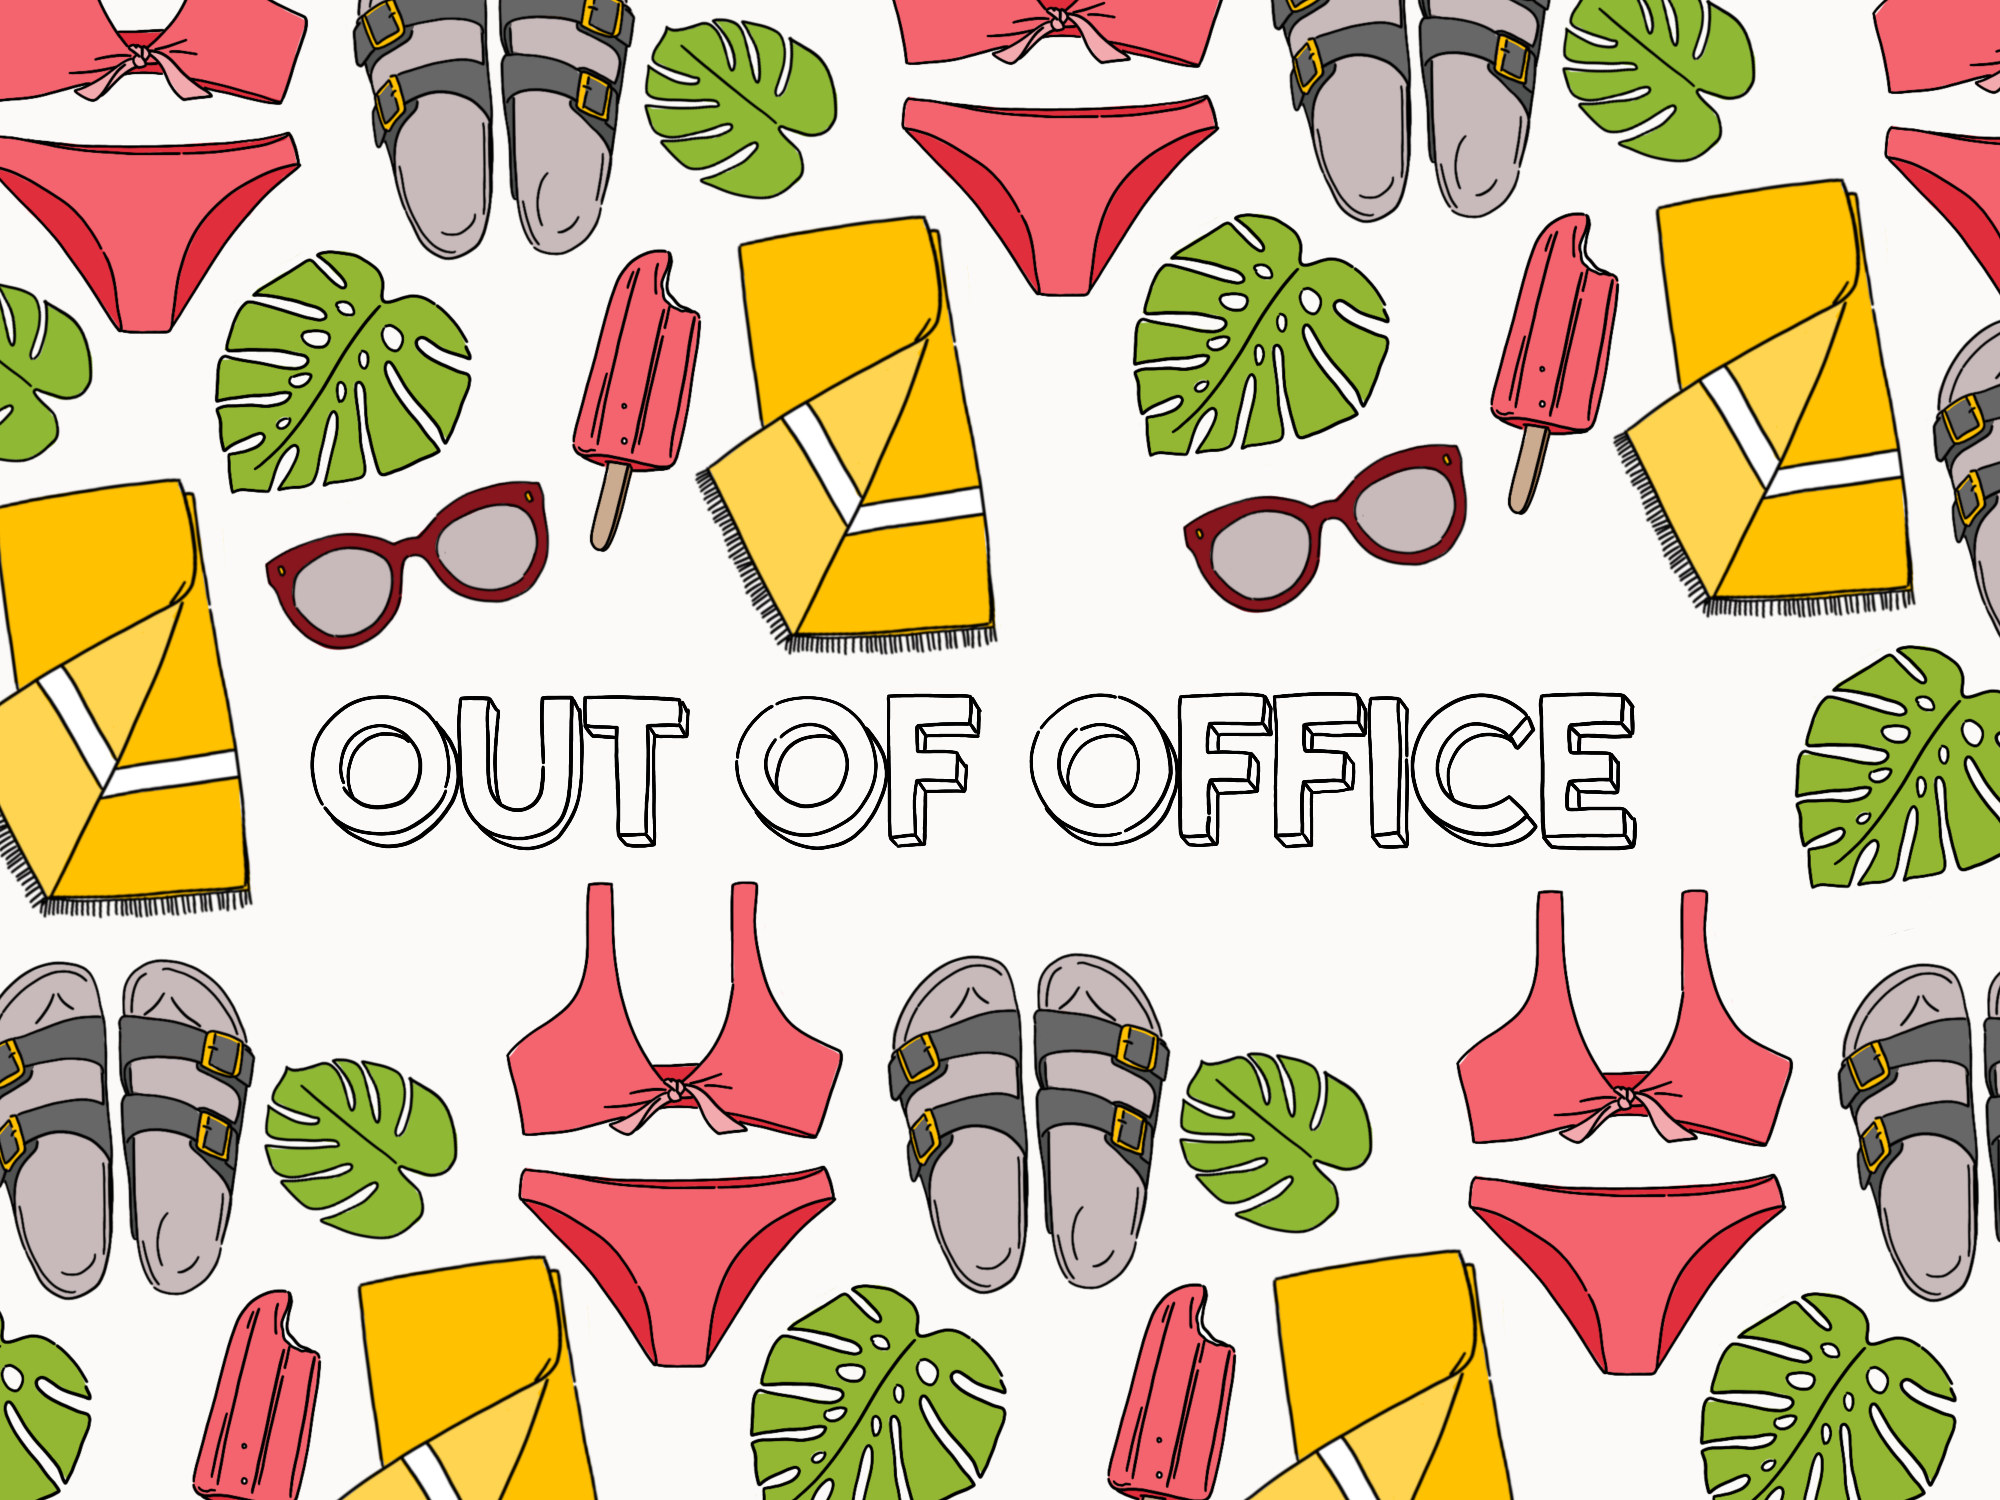 Out of office illustration